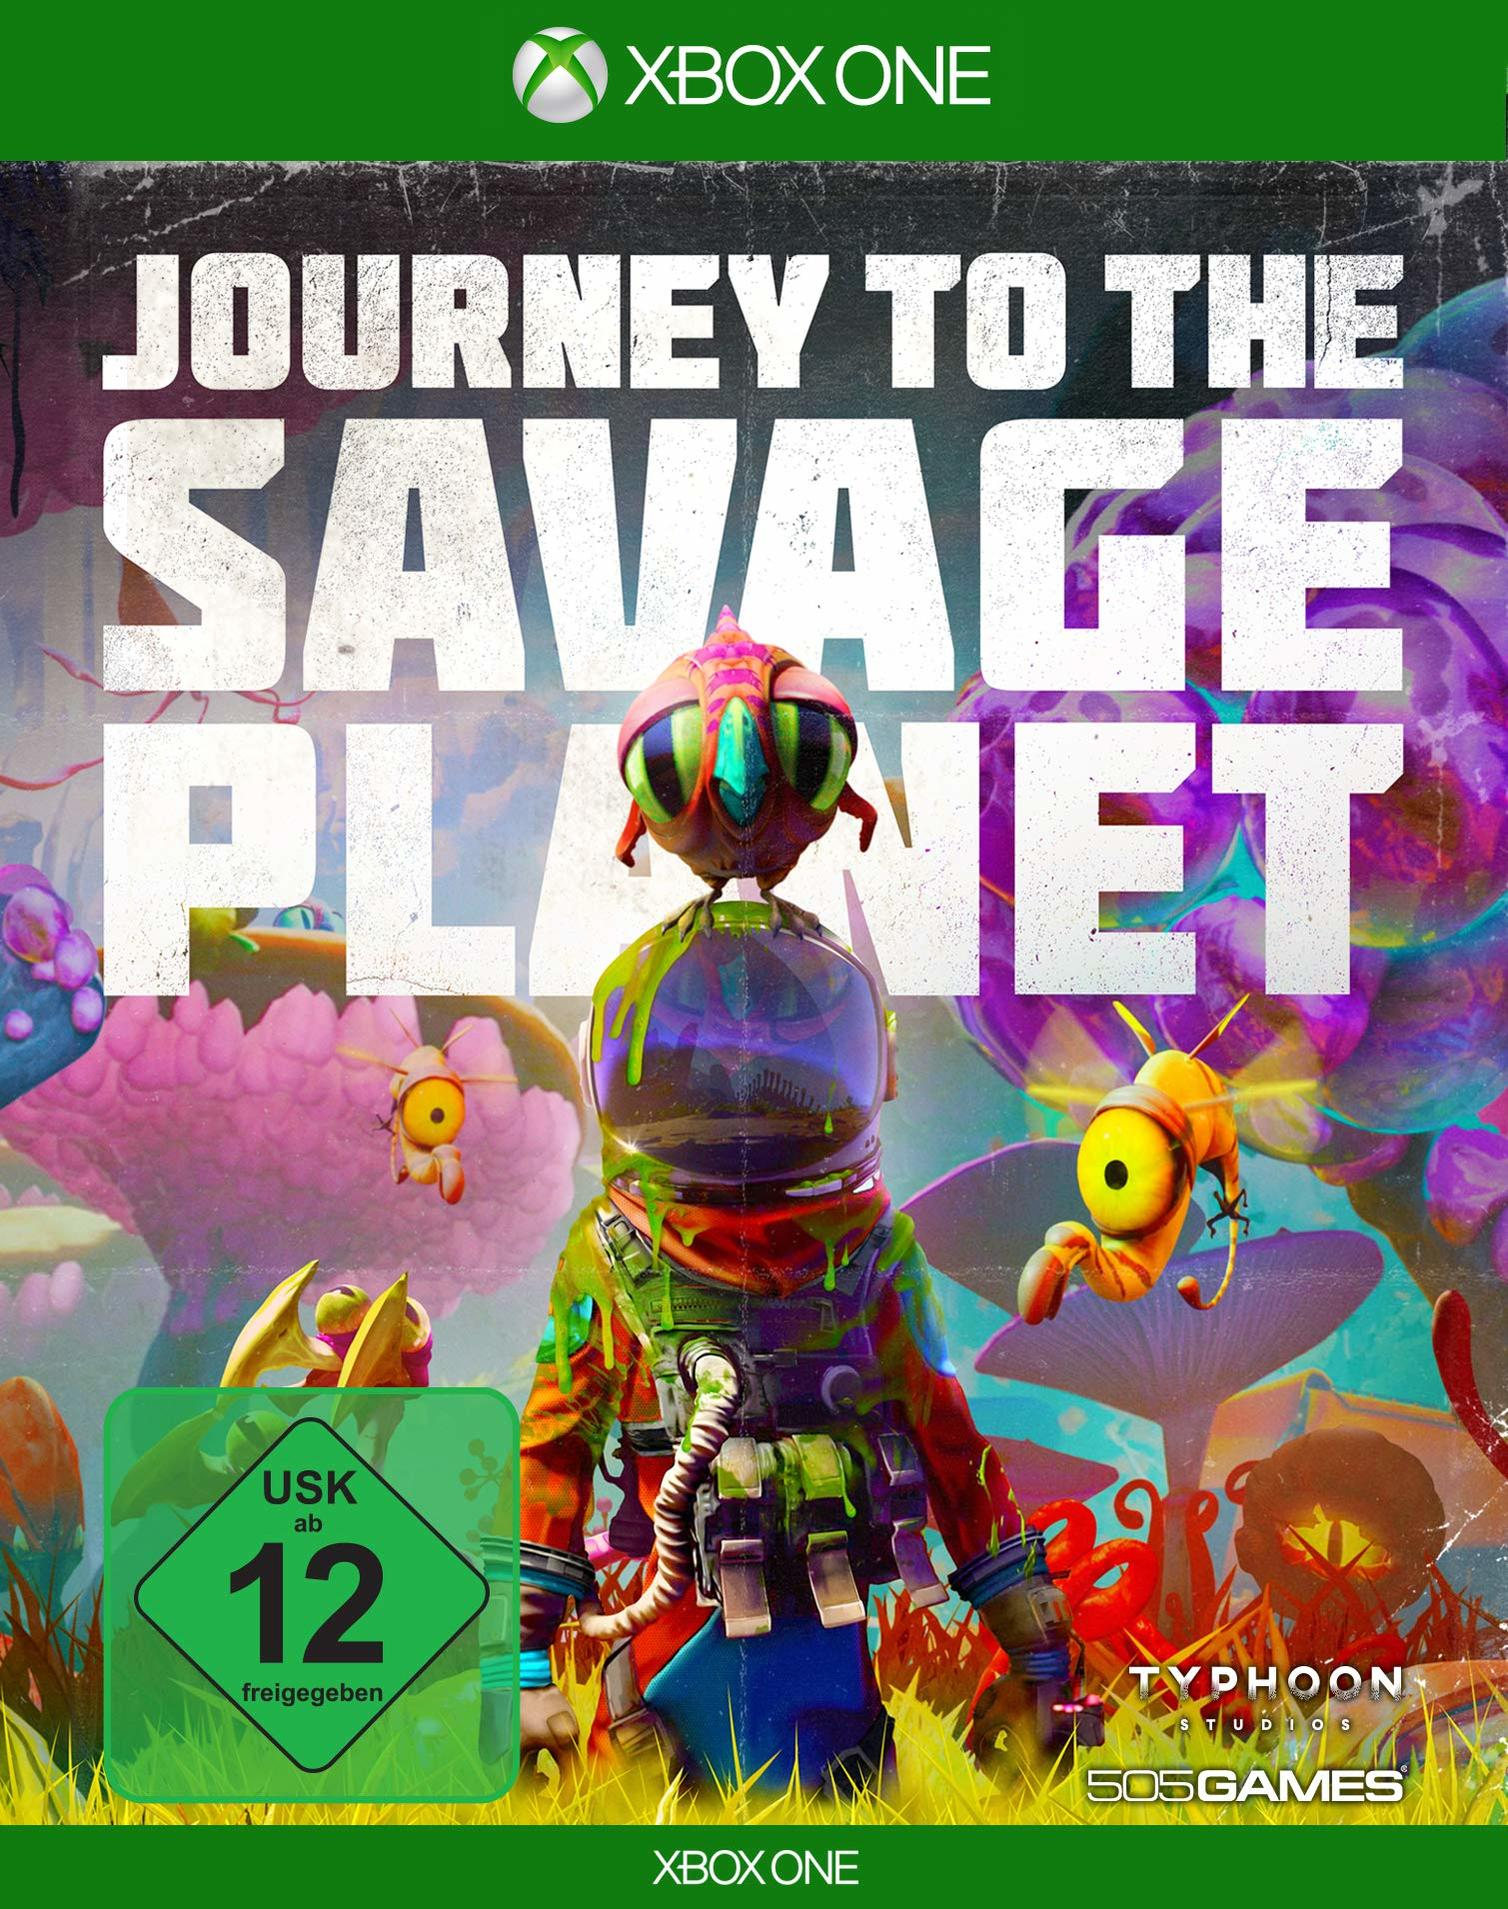 XBO JOURNEY TO One] - THE PLANET SAVAGE [Xbox